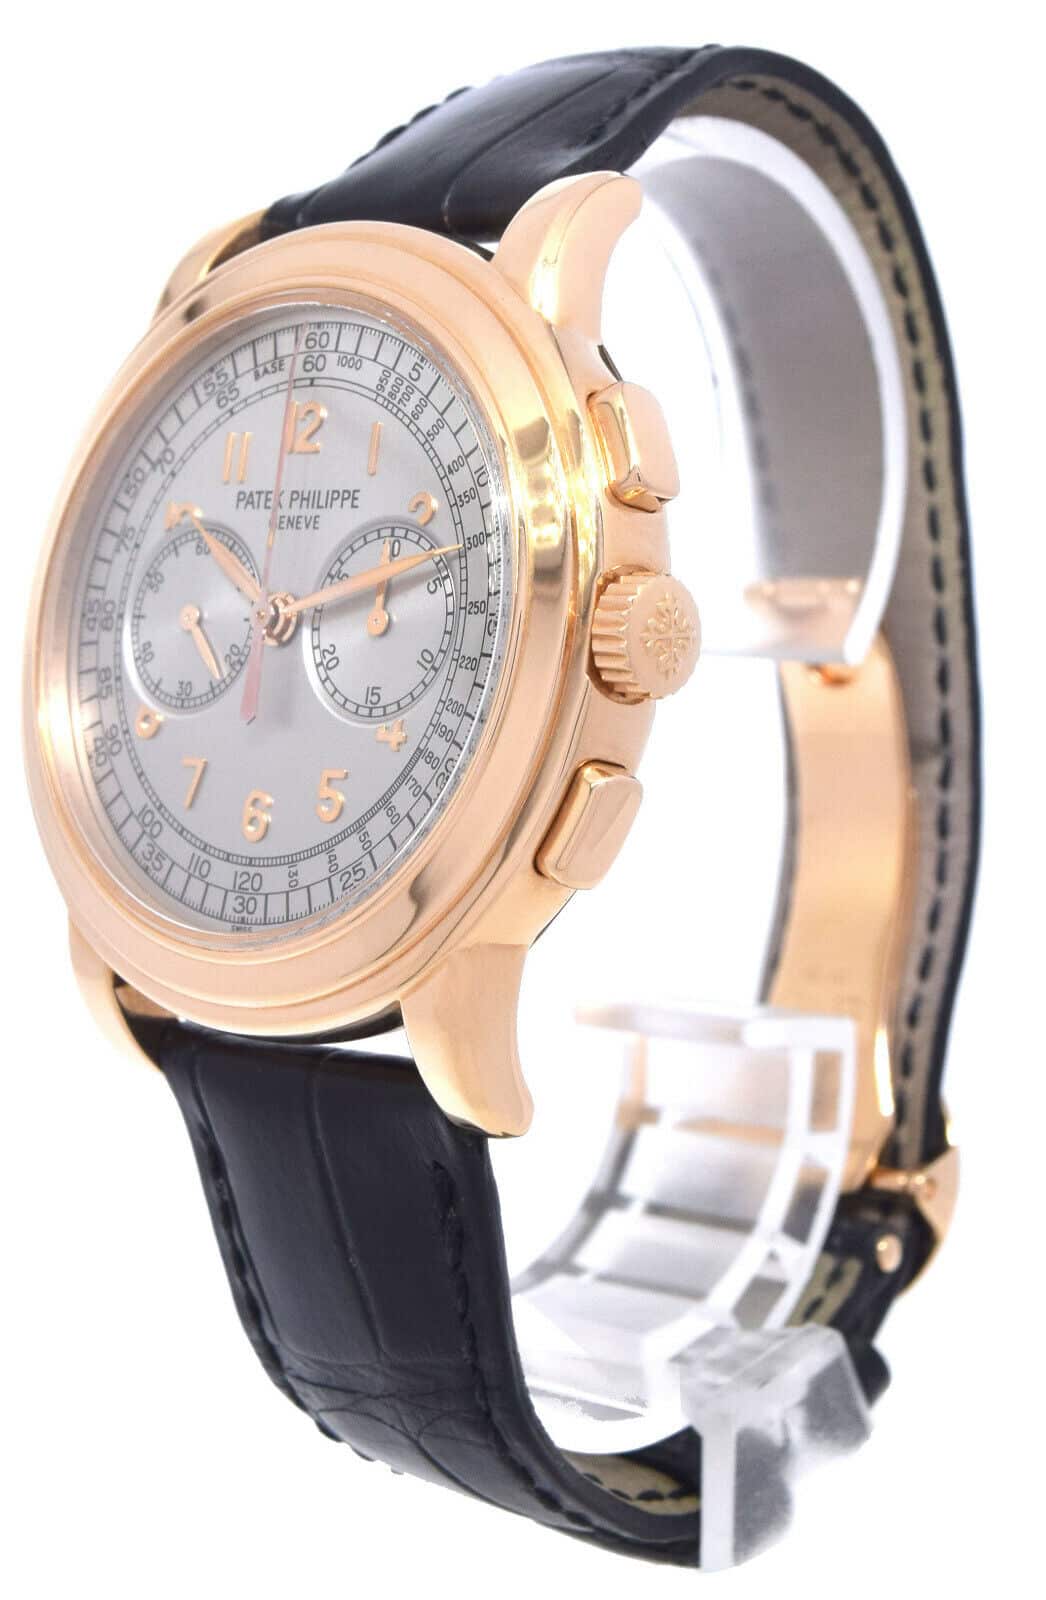 Patek Philippe 5070 18K Rose Gold Chronograph Mens Watch Box/Papers '05 5070R